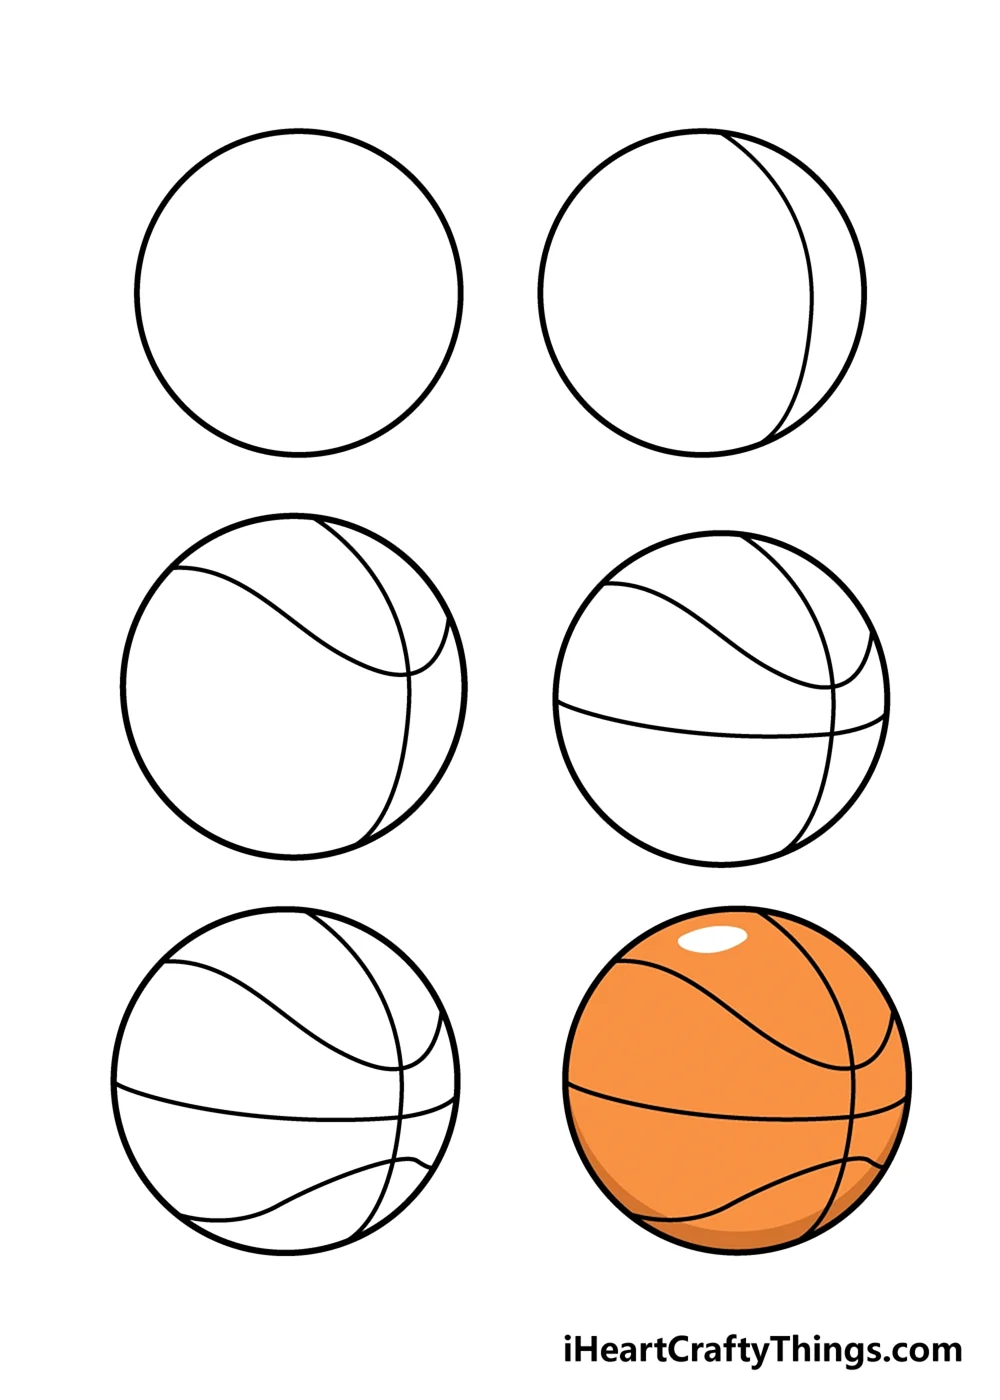 How to draw Basketball